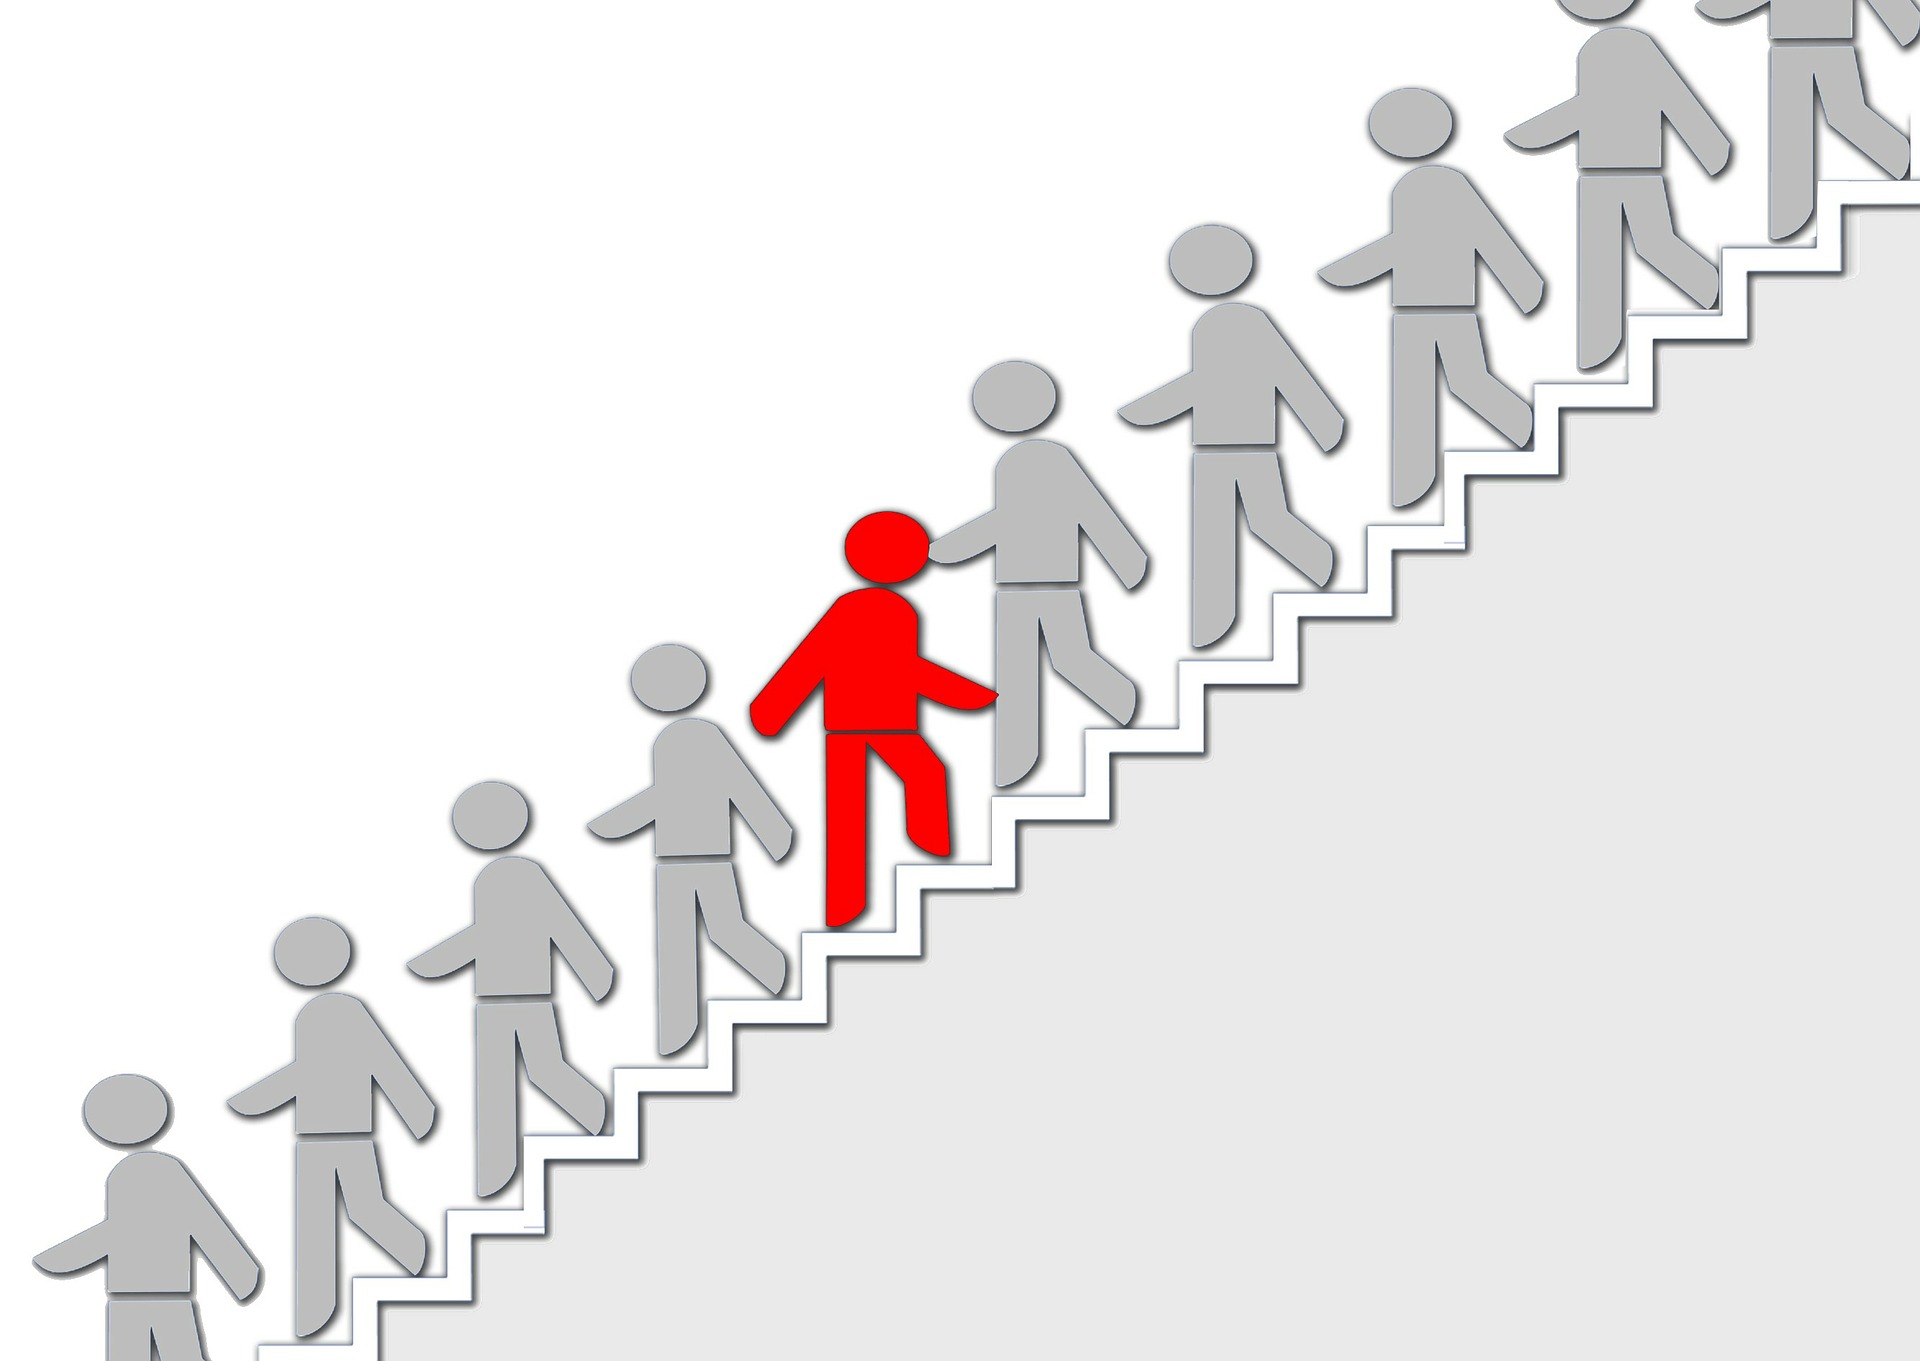 Image of several grey silhouettes walking down a set of stairs. One red individual is walking up the stairs instead.